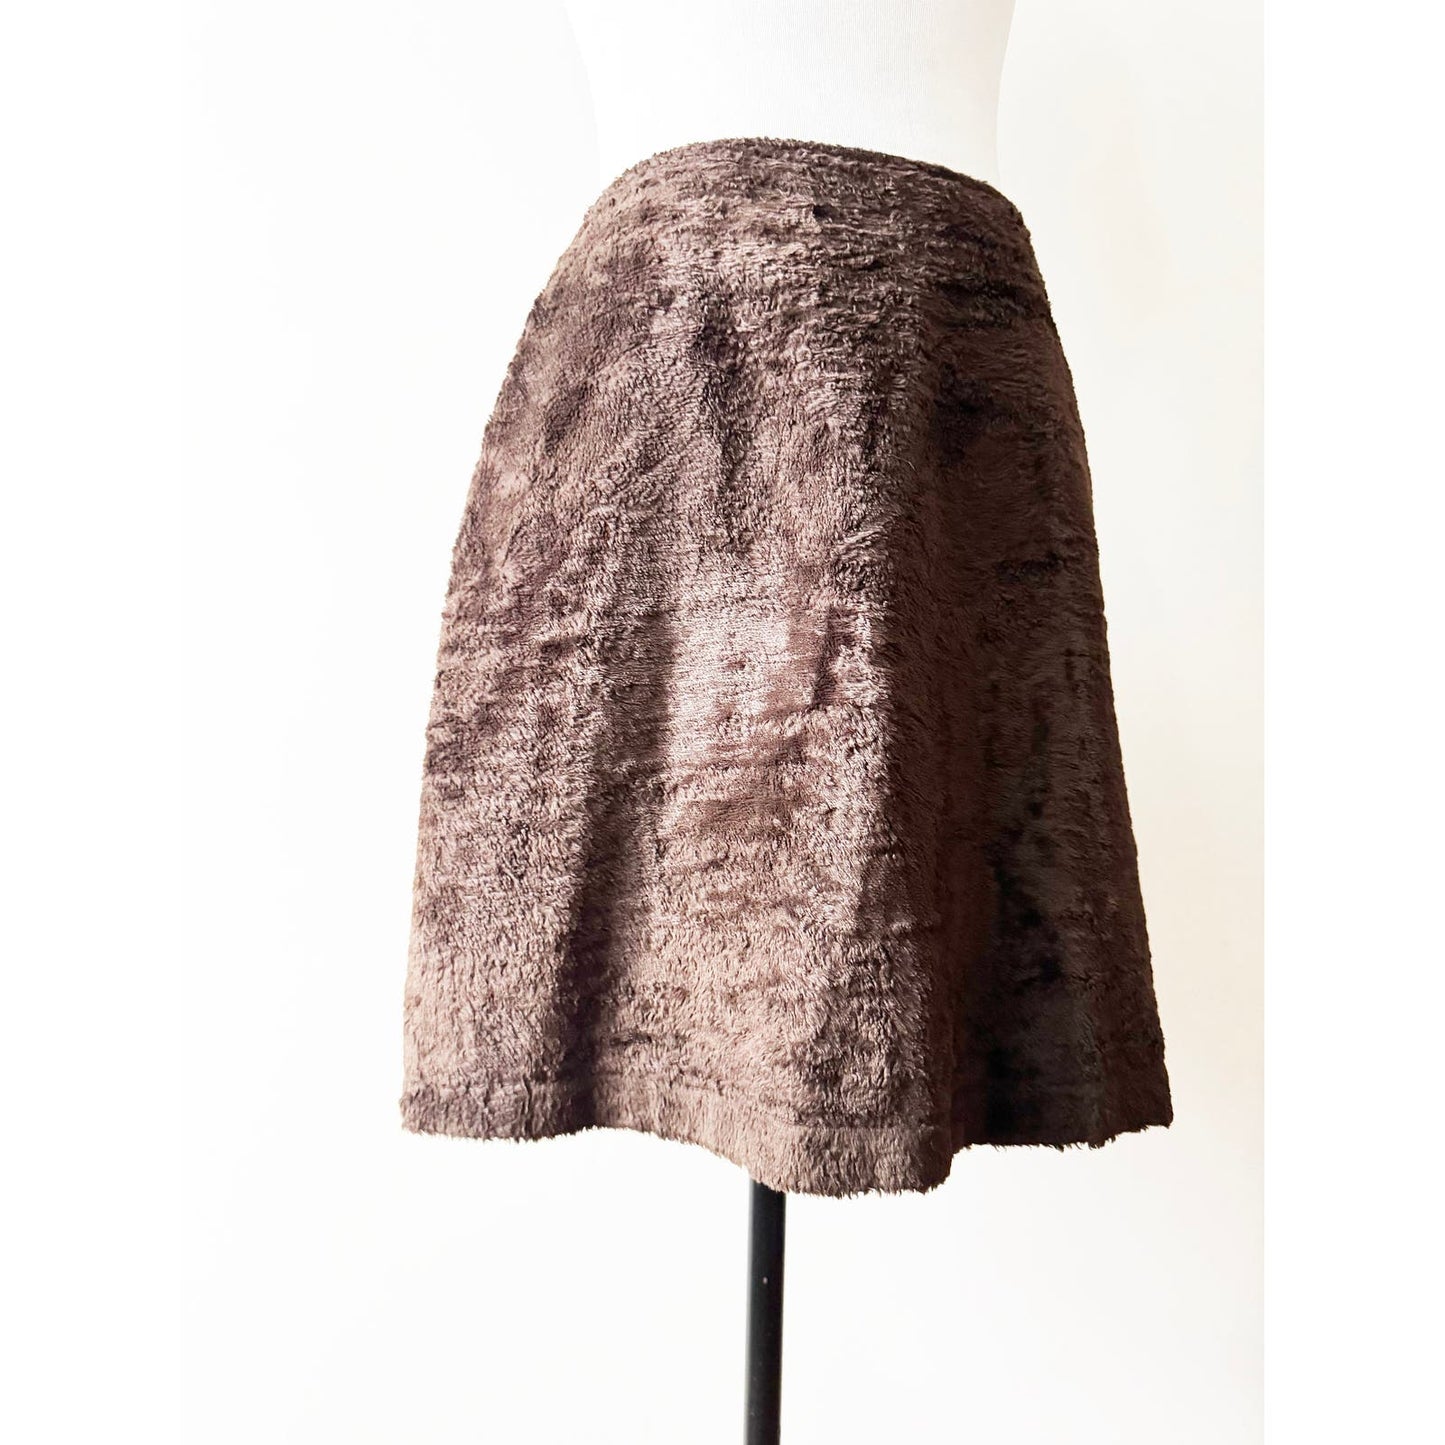 Y2k ANNA SUI Fuzzy Brown Skirt | Size US 6